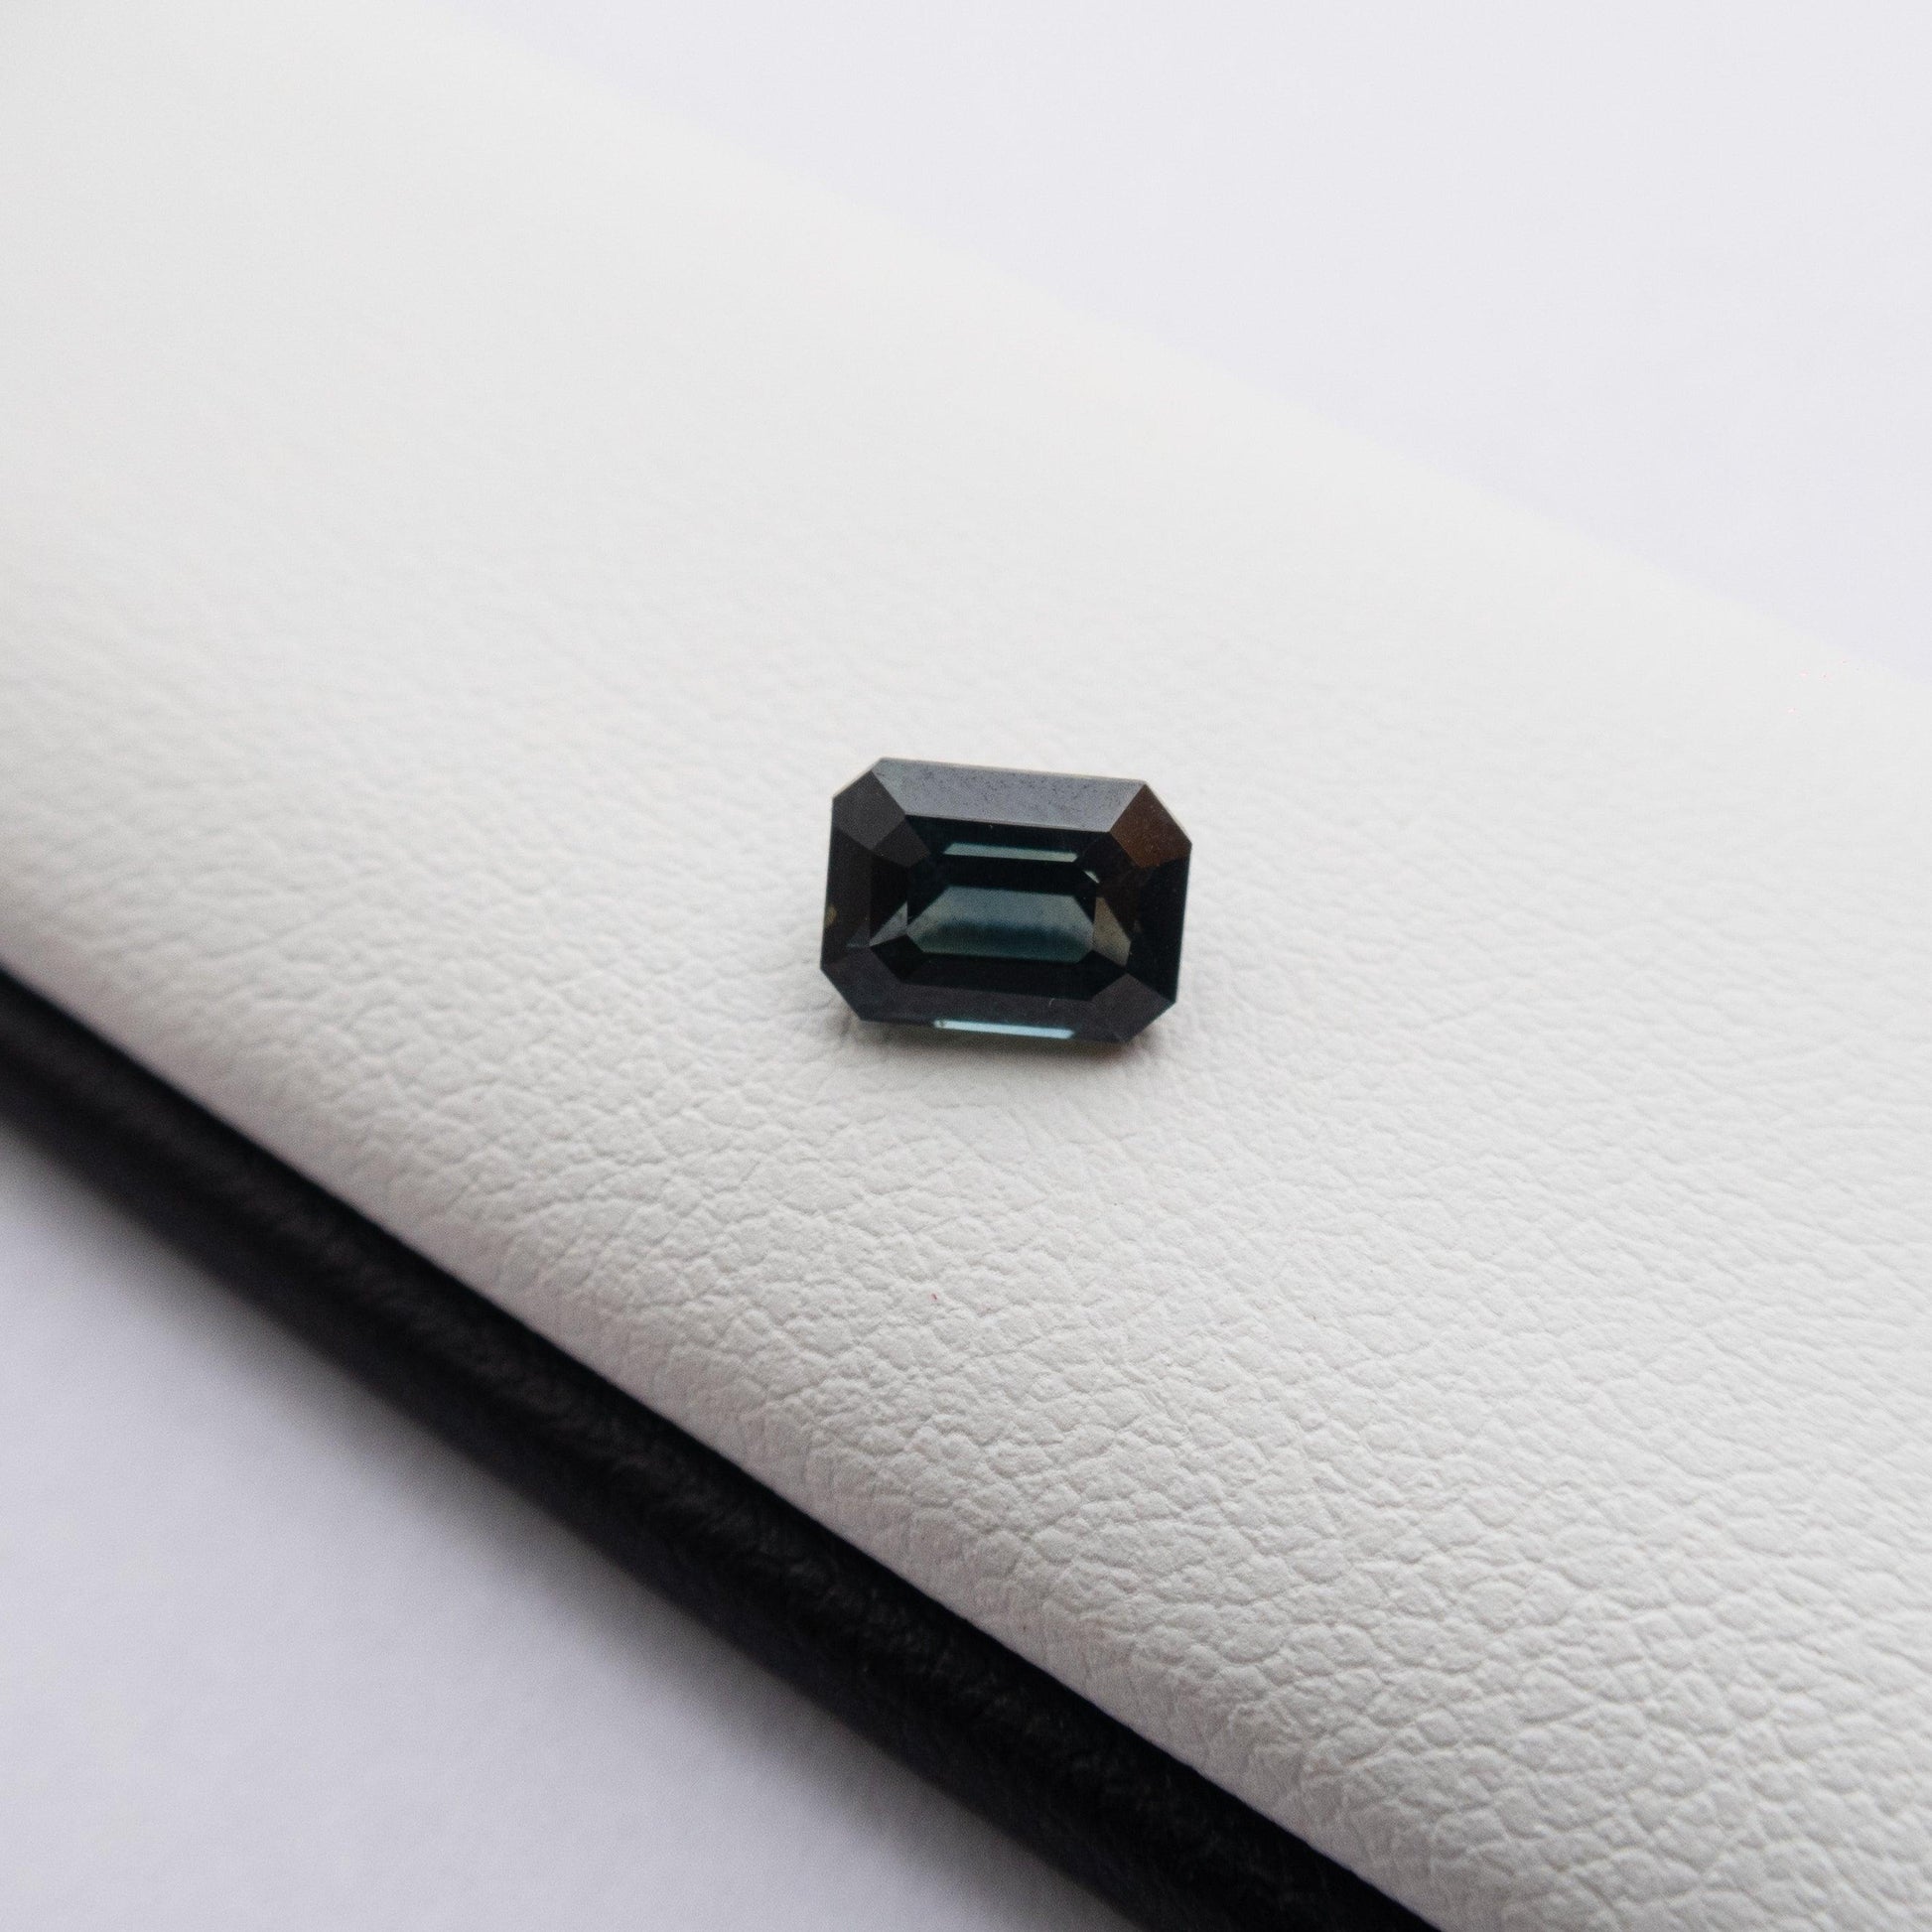 Teal Sapphire Natural No Heat 1.53ct - The Colored Stone Co.